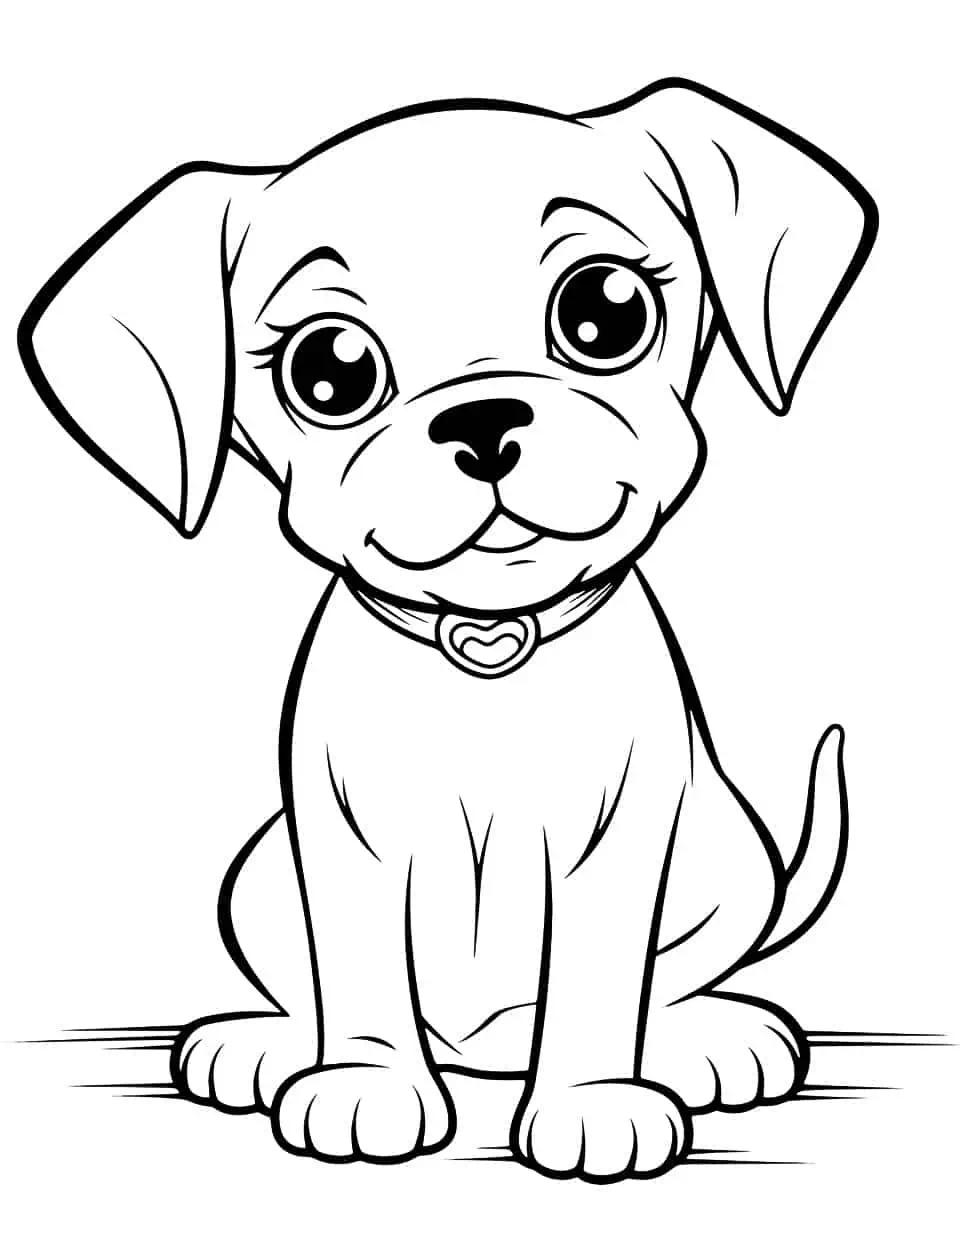 Kawaii Boxer Puppy Coloring Page - A Boxer puppy, styled in a cute, kawaii theme with big, adorable eyes.